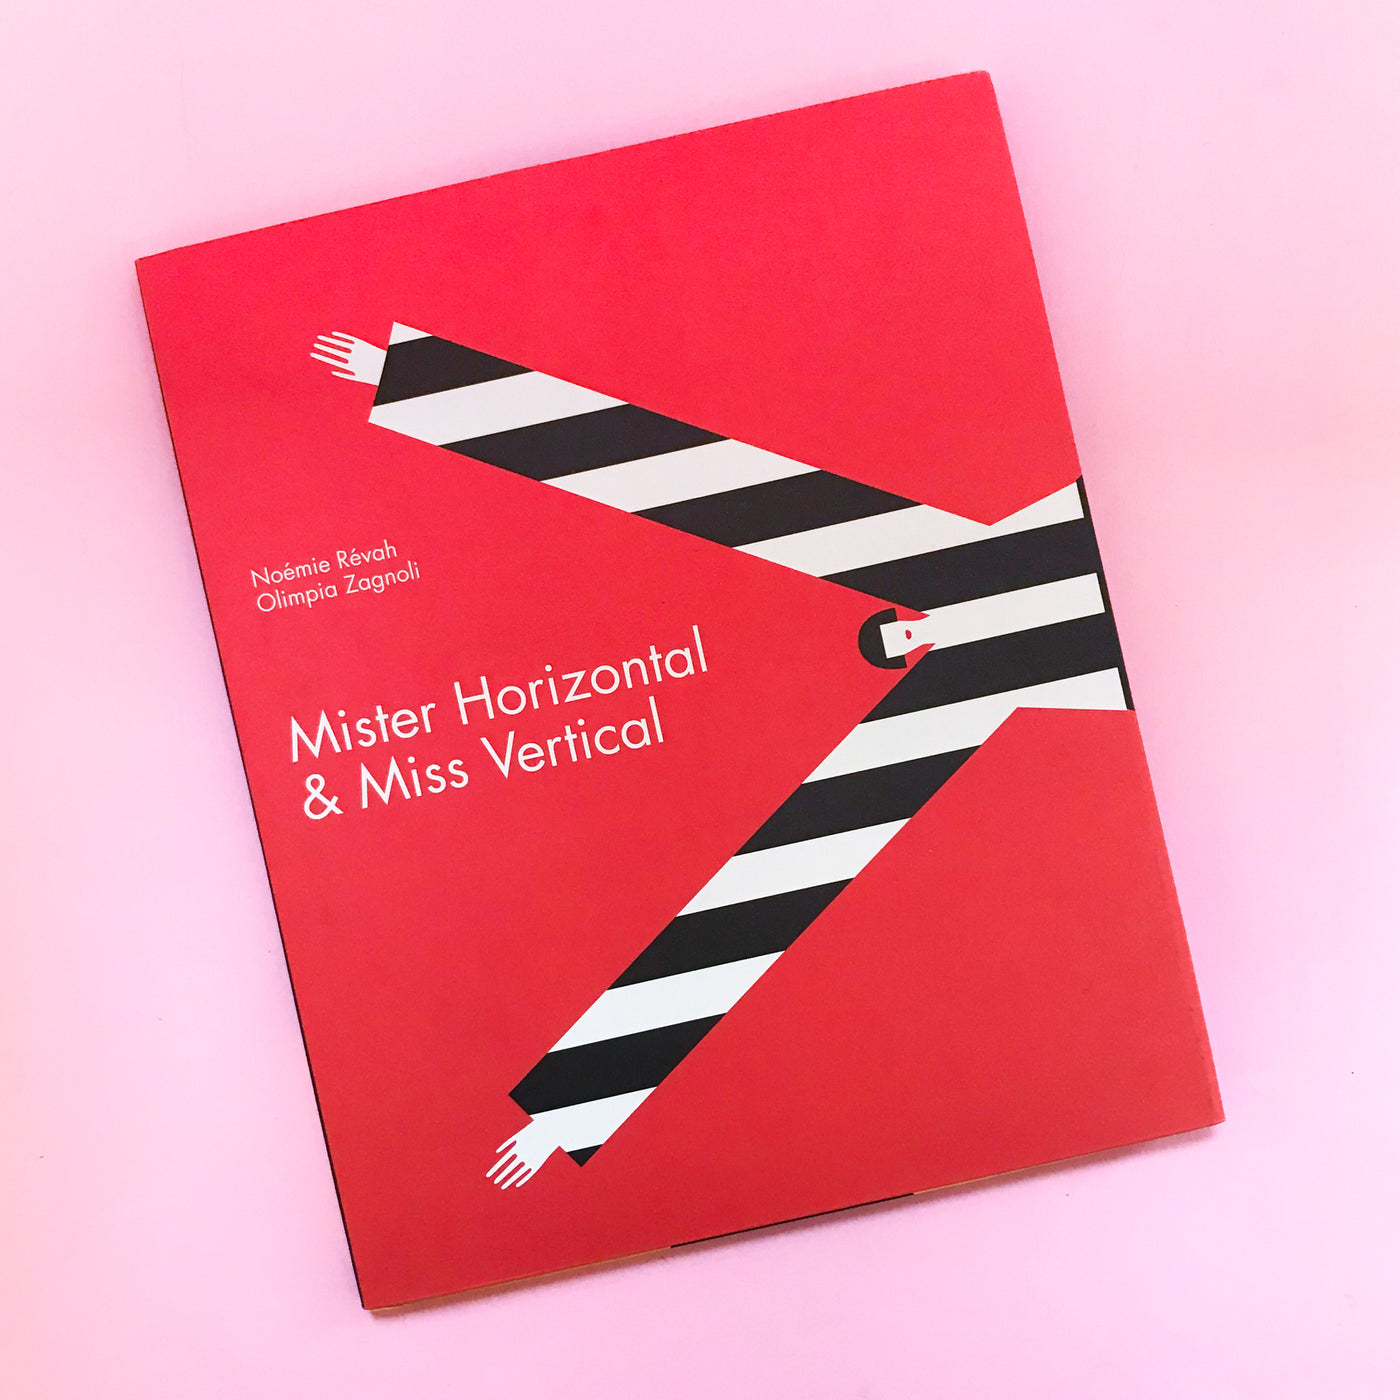 Mister Horizontal and Miss Vertical by Noemie Revah and Olimpia Zagnoli